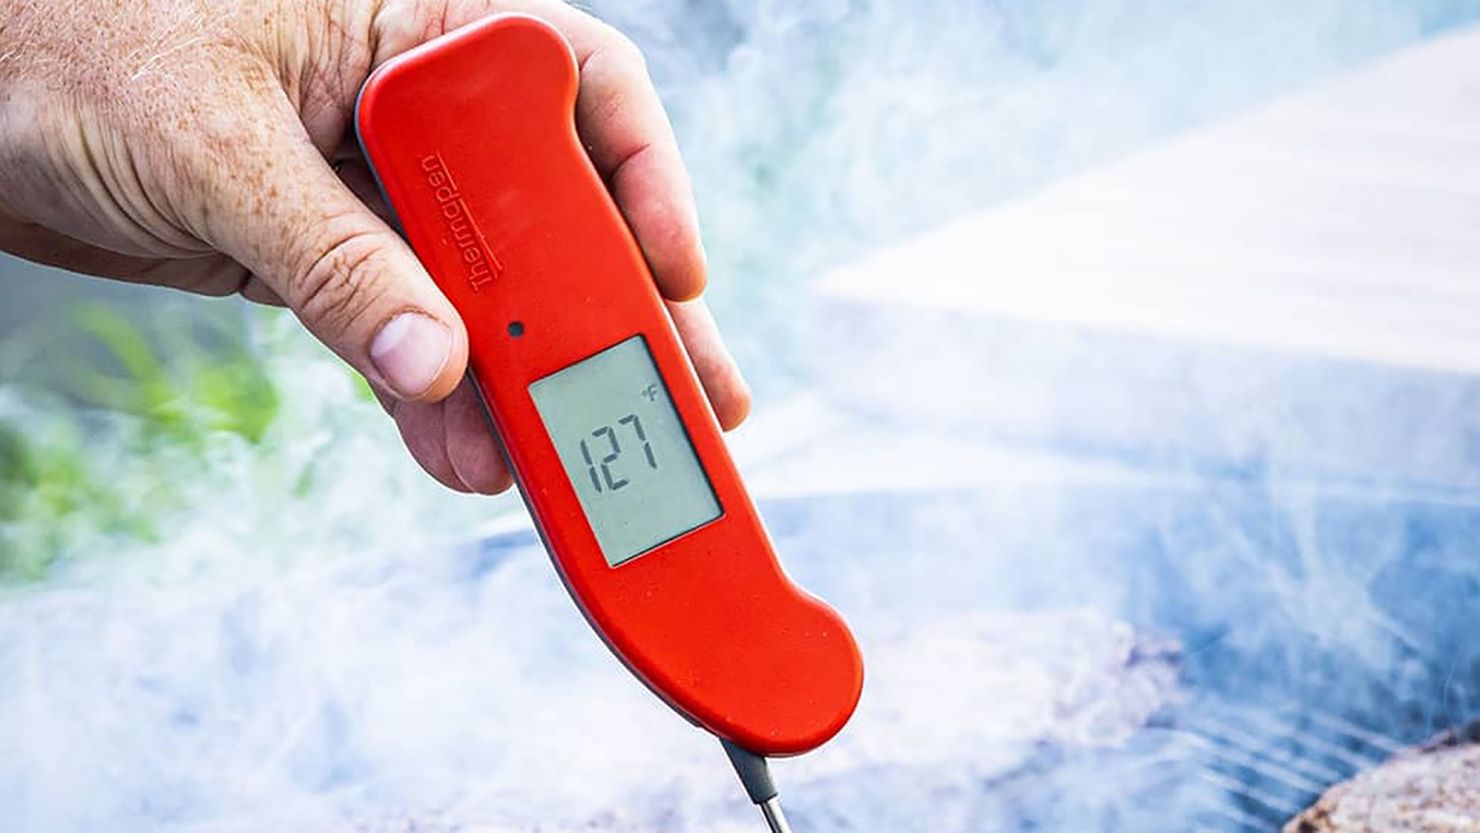 The Thermapen One Is Our Favorite Instant-Read Thermometer